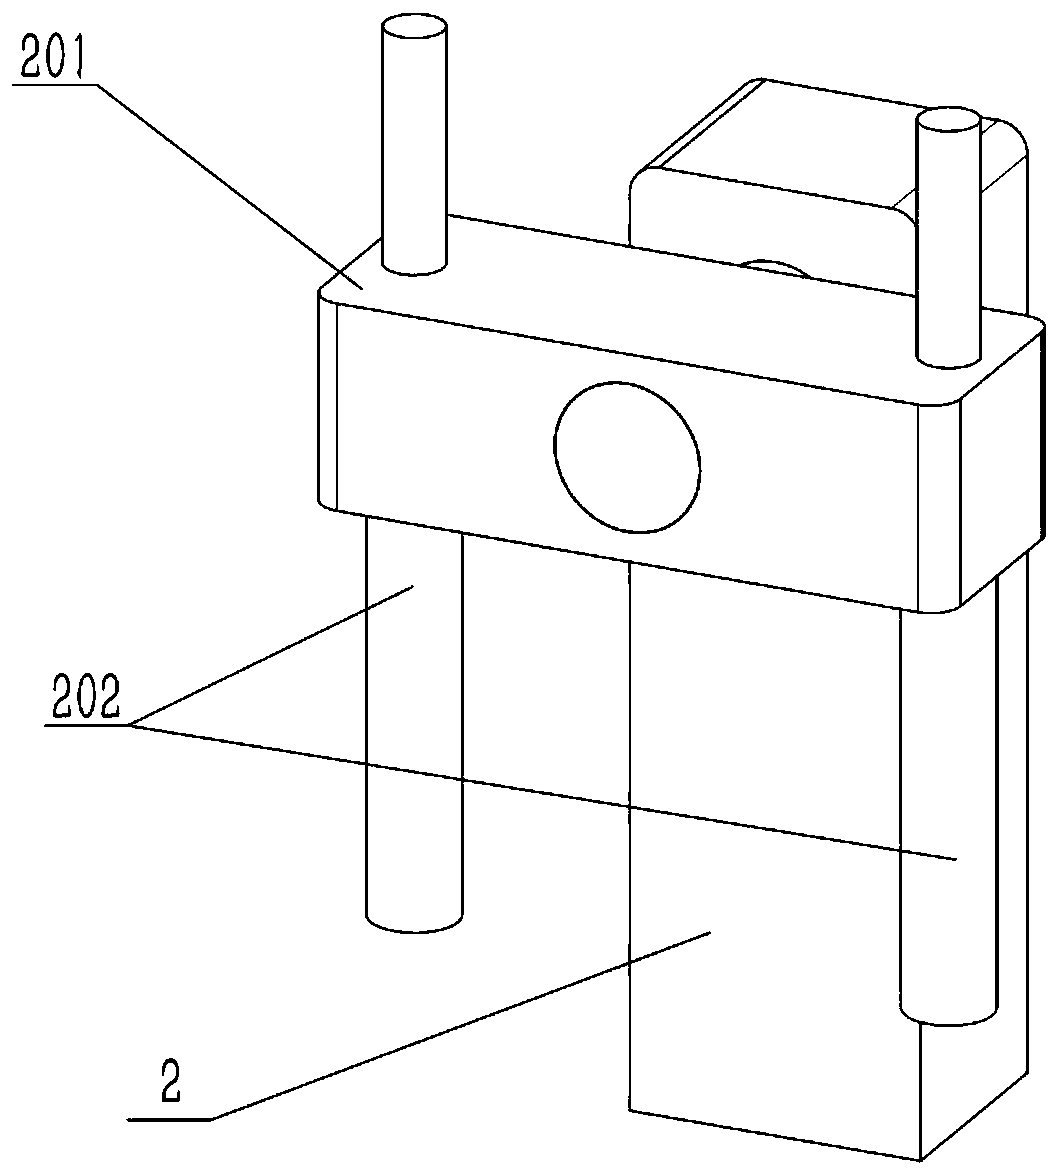 Physical quantity inspection device